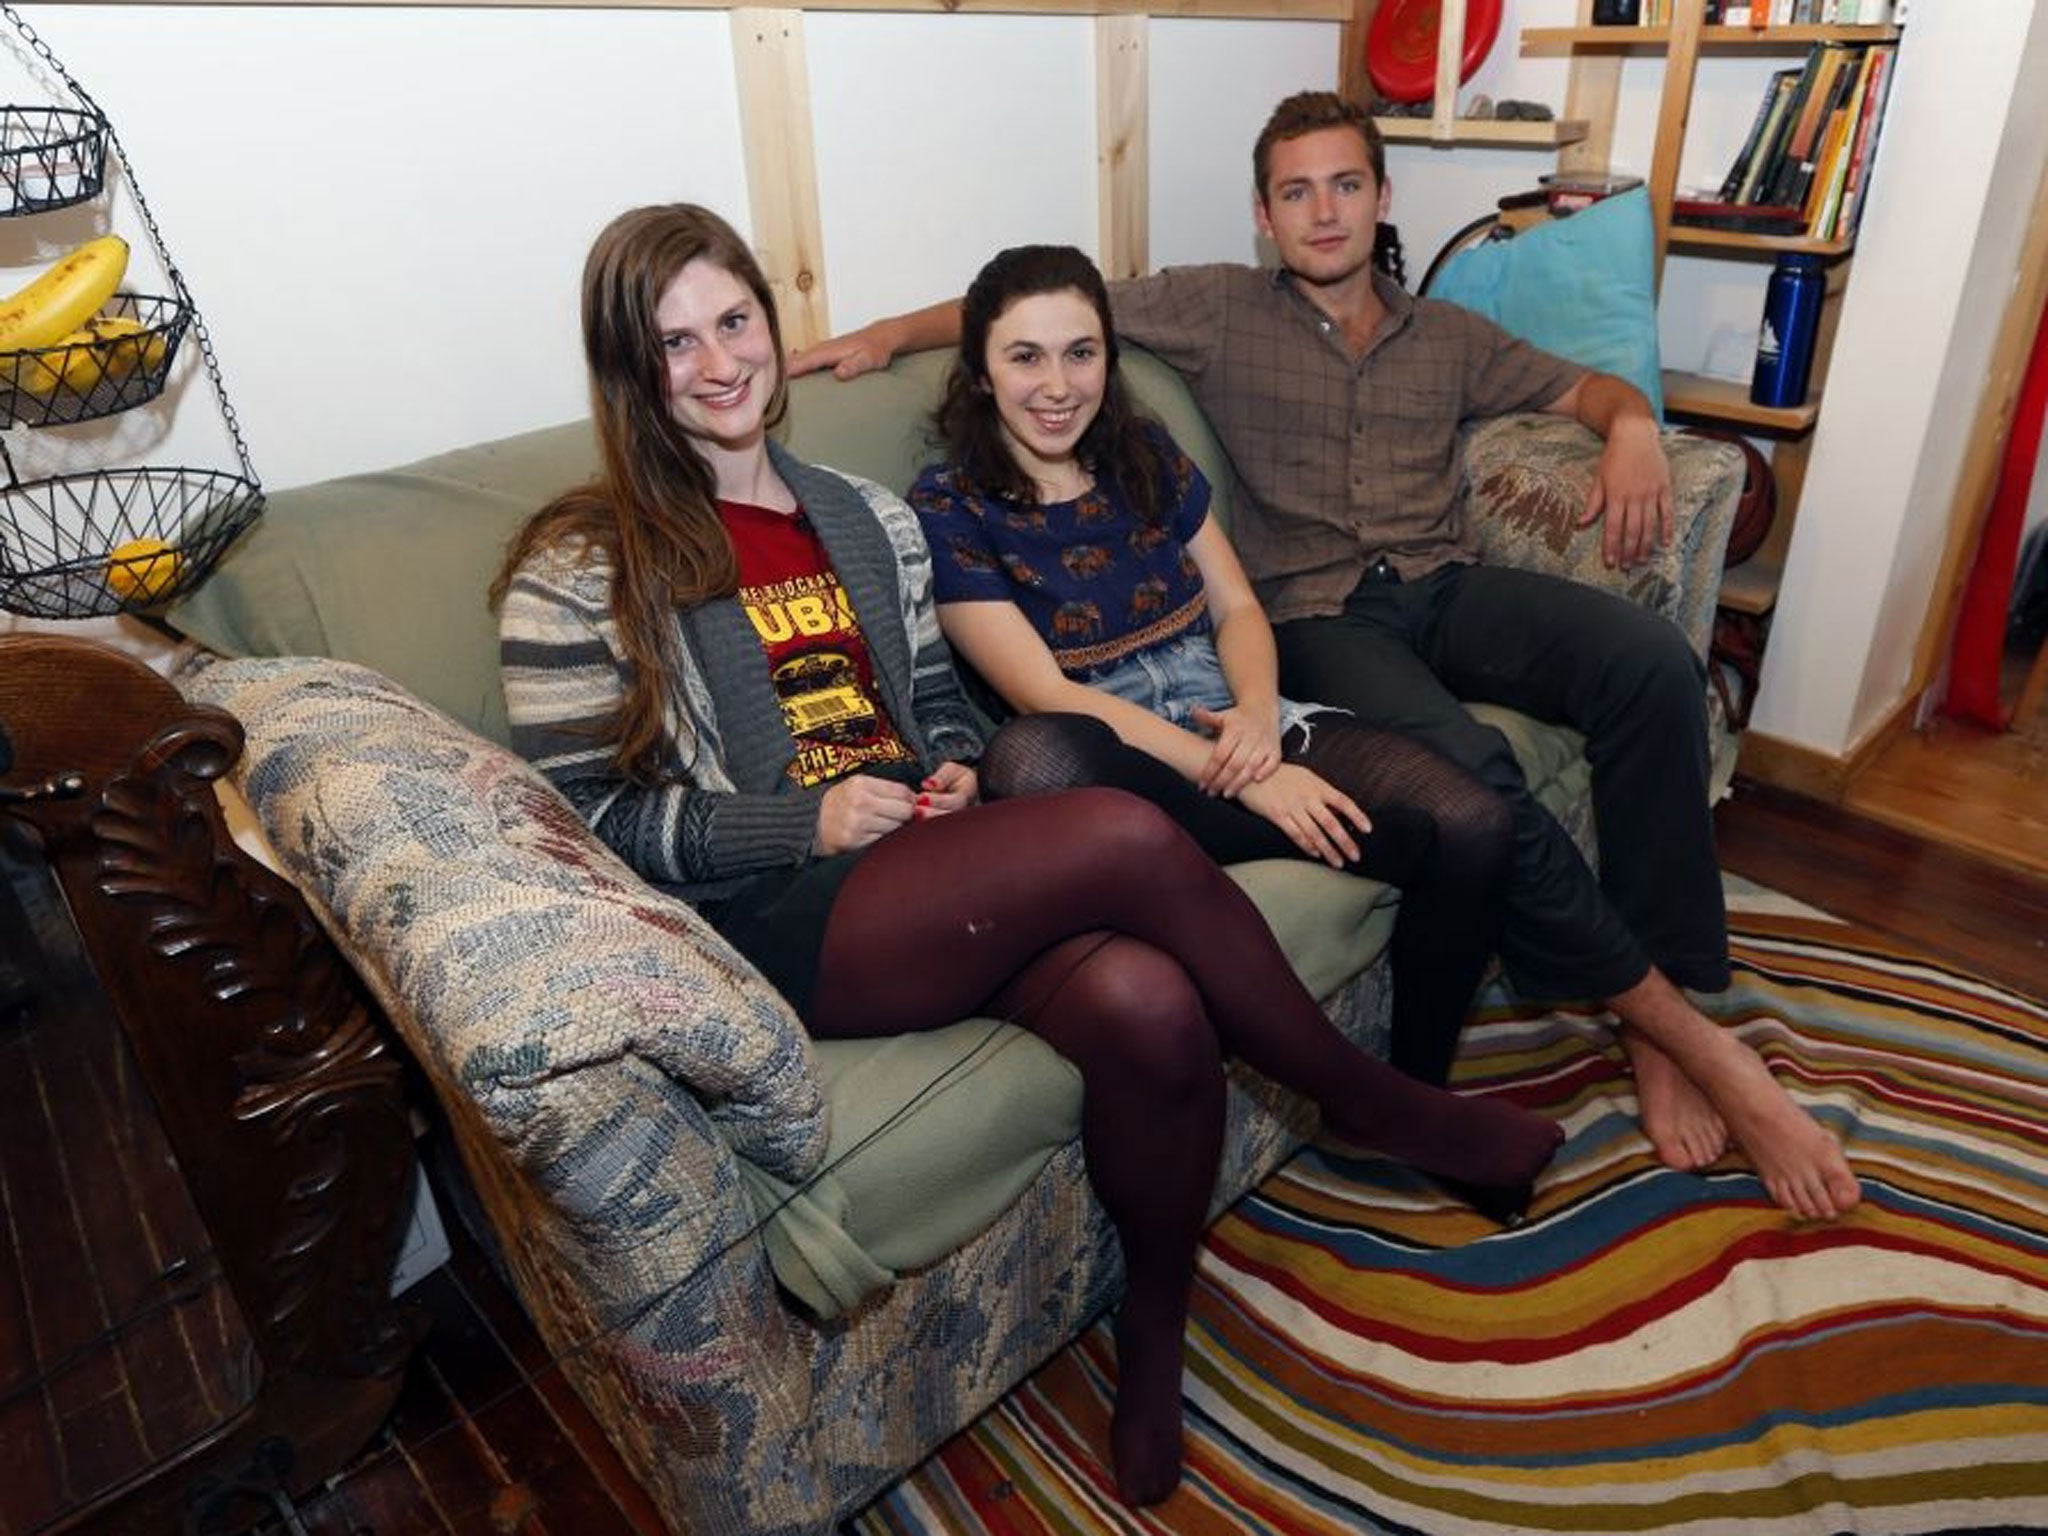 From left, Lara Russo, Cally Guasti and Reese Werkhoven sit on a couch in their apartment